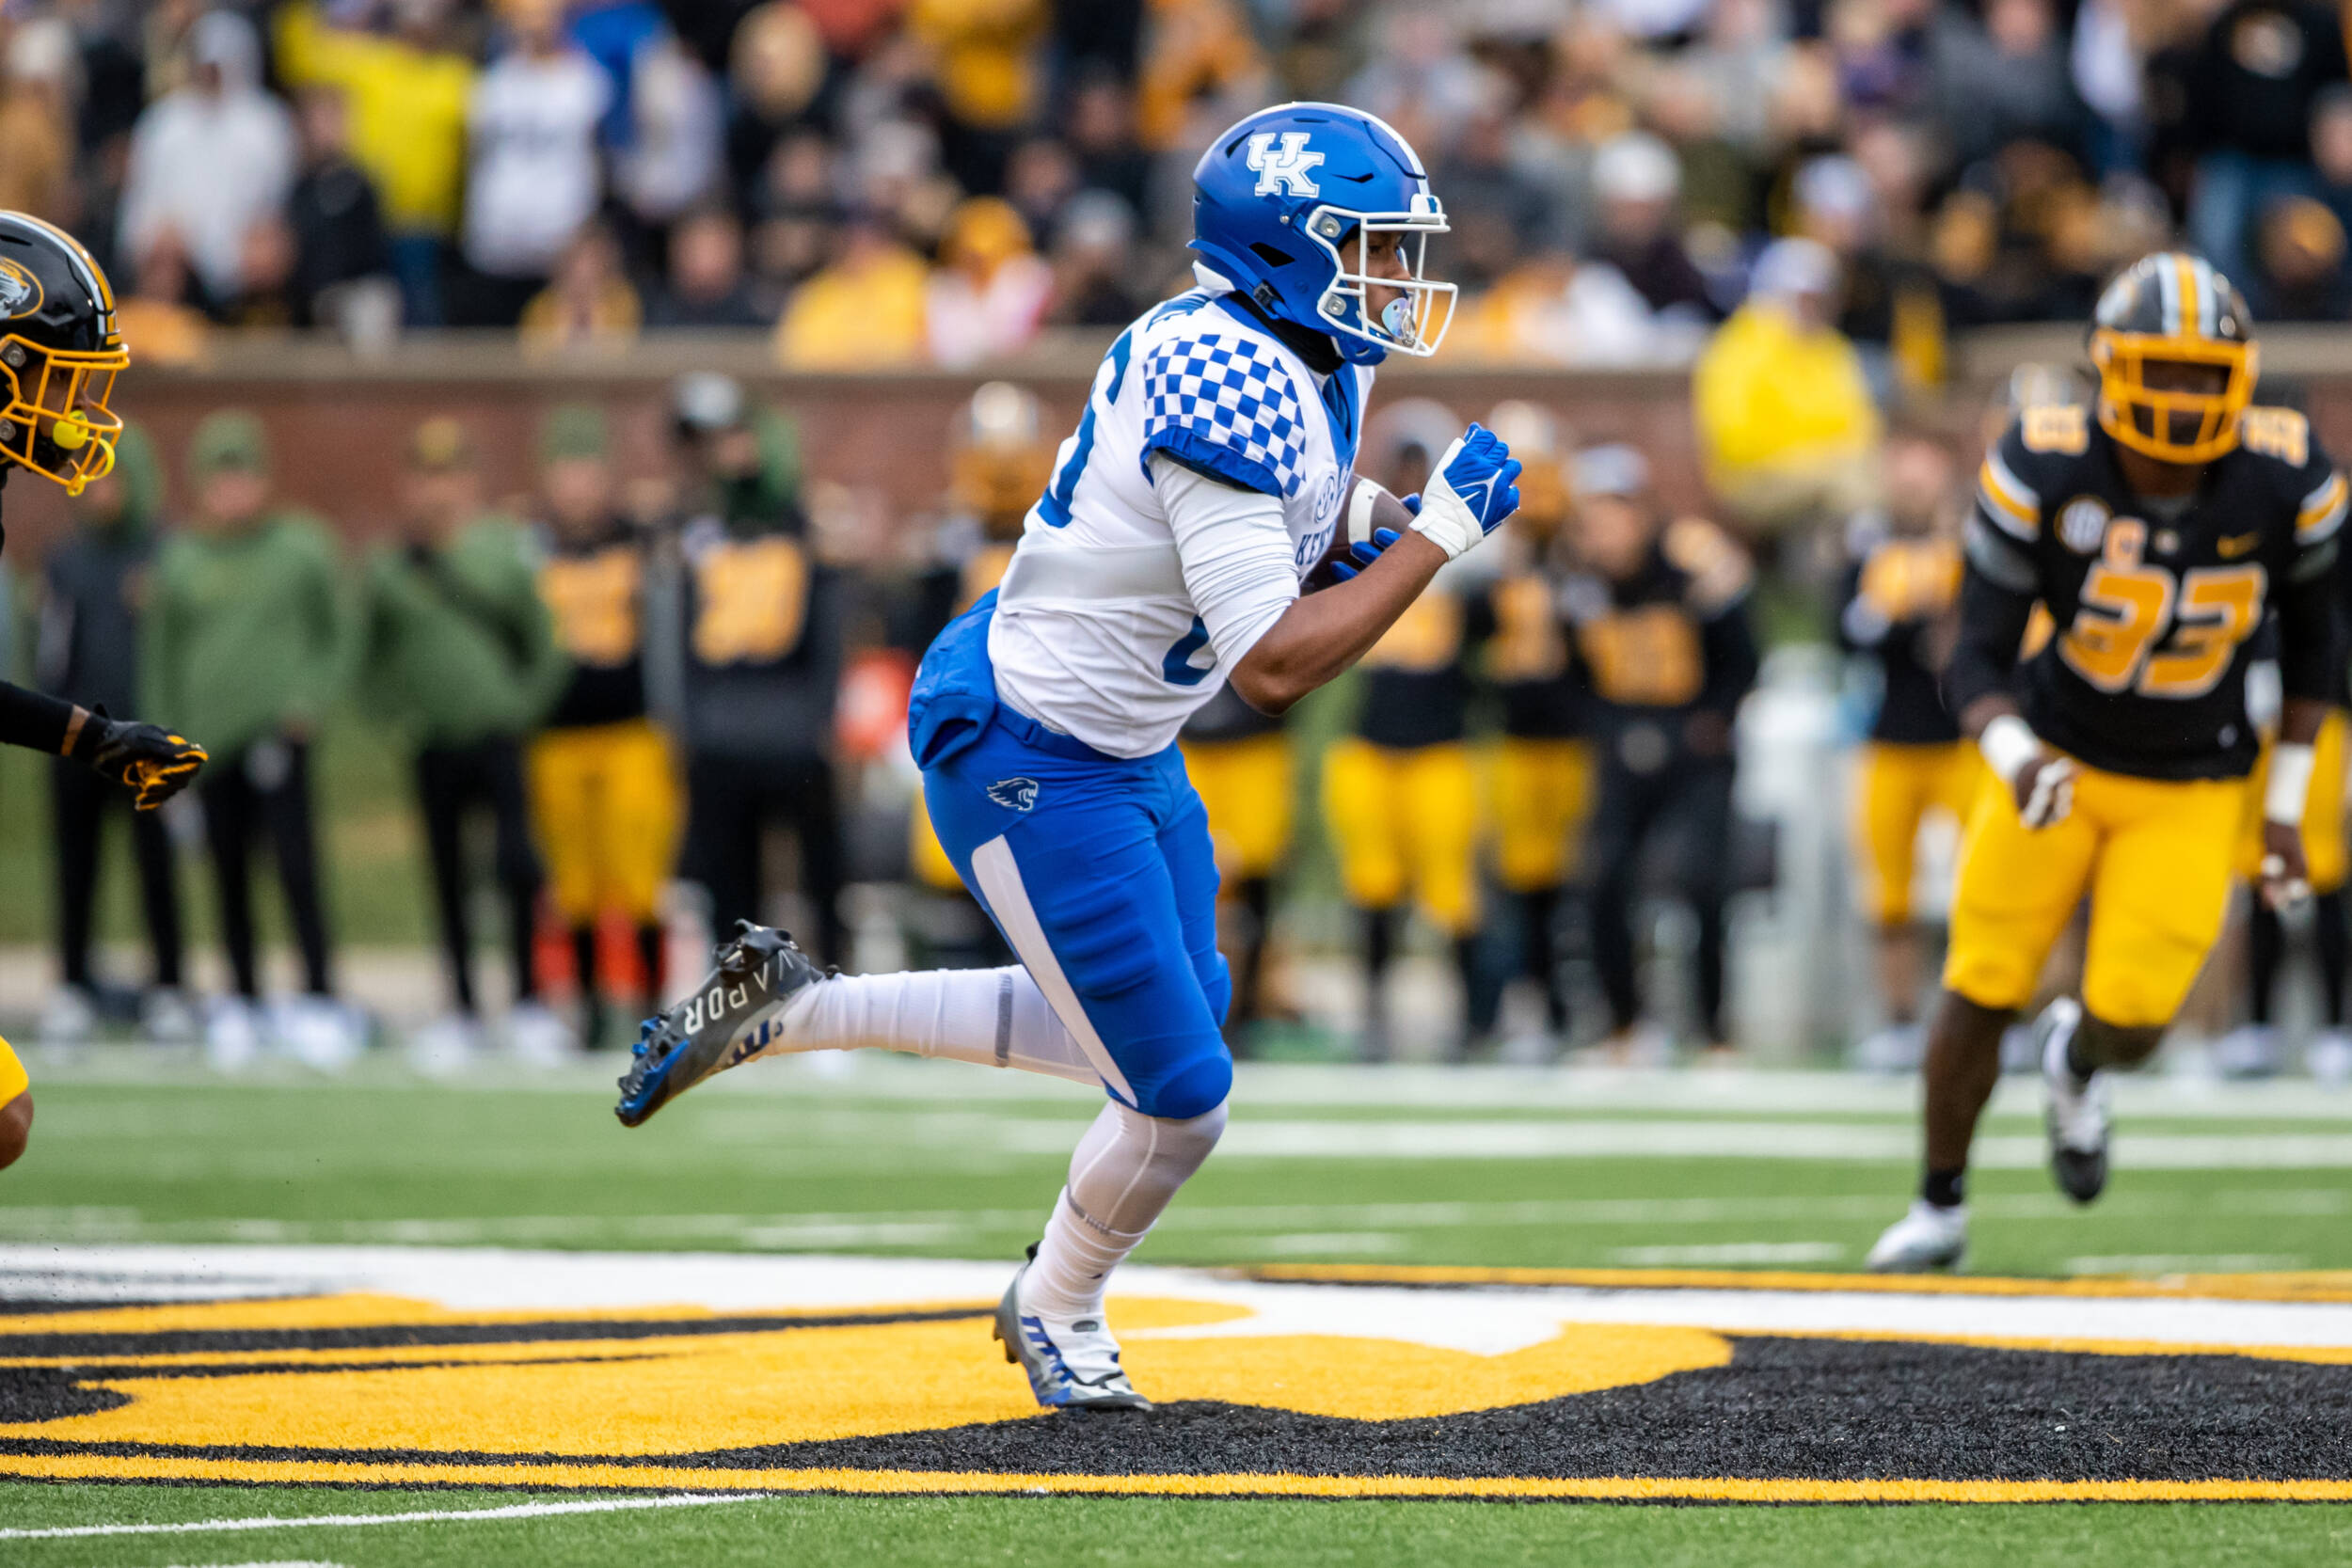 Stoops, Cats Hoping for 'Cleaner' Performance on Saturday